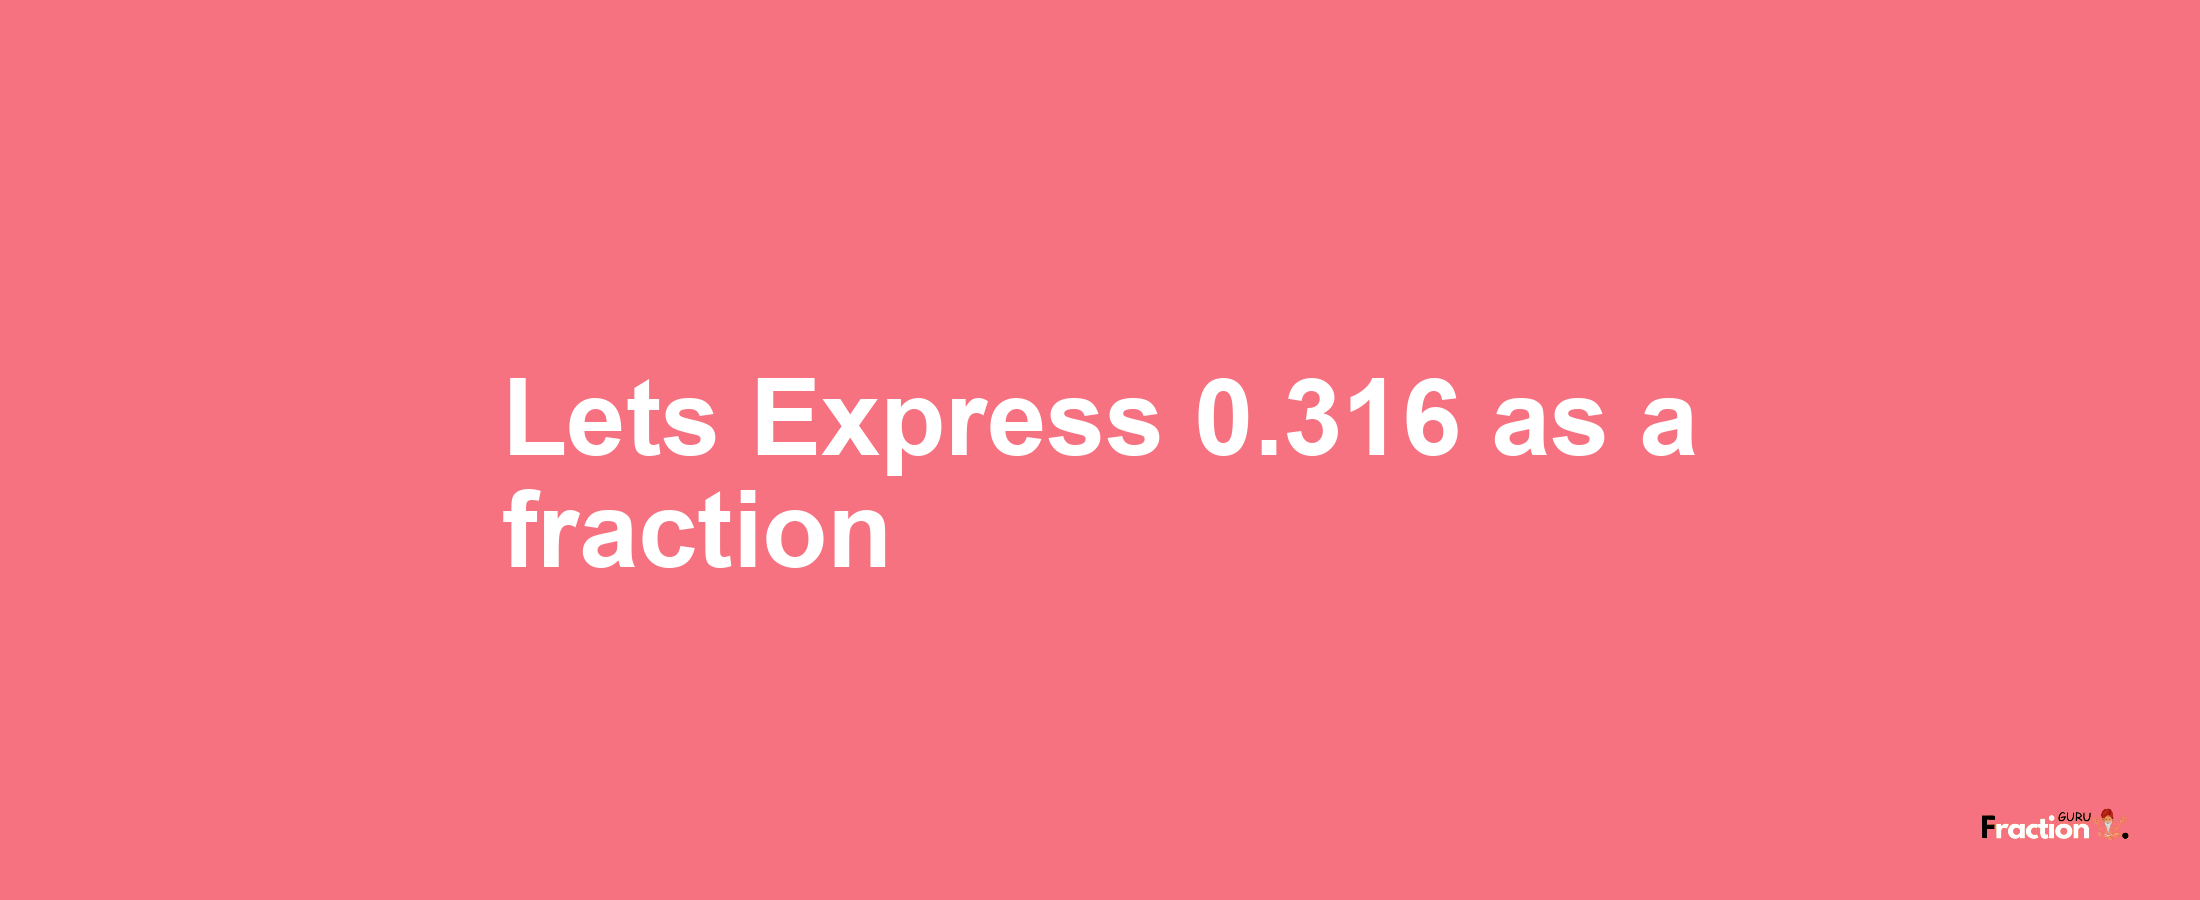 Lets Express 0.316 as afraction